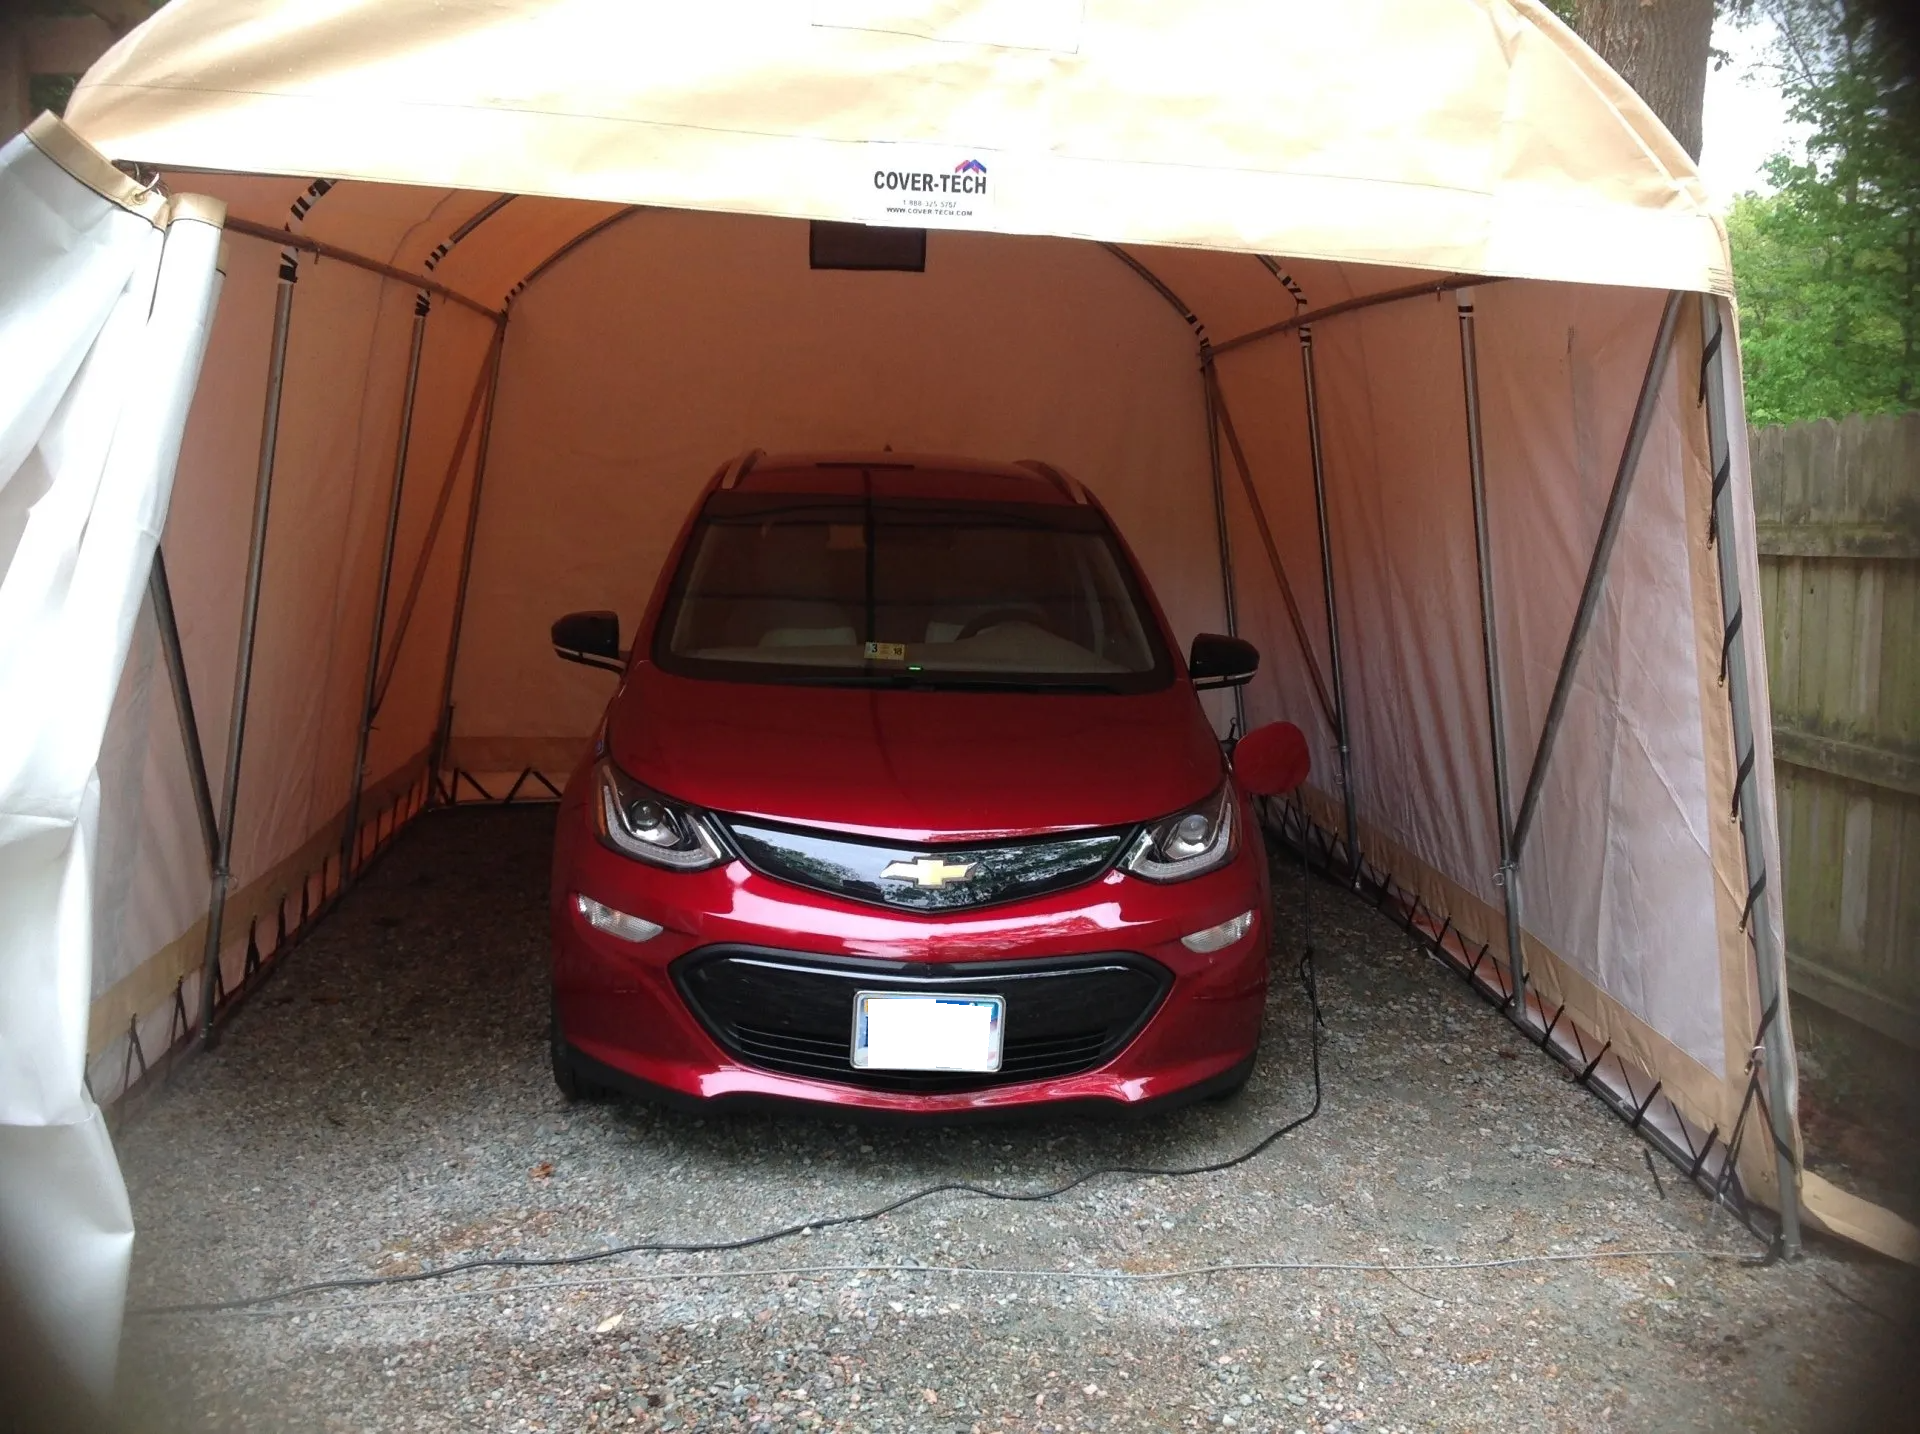 Nice reviews about cover-tech portable car shelters